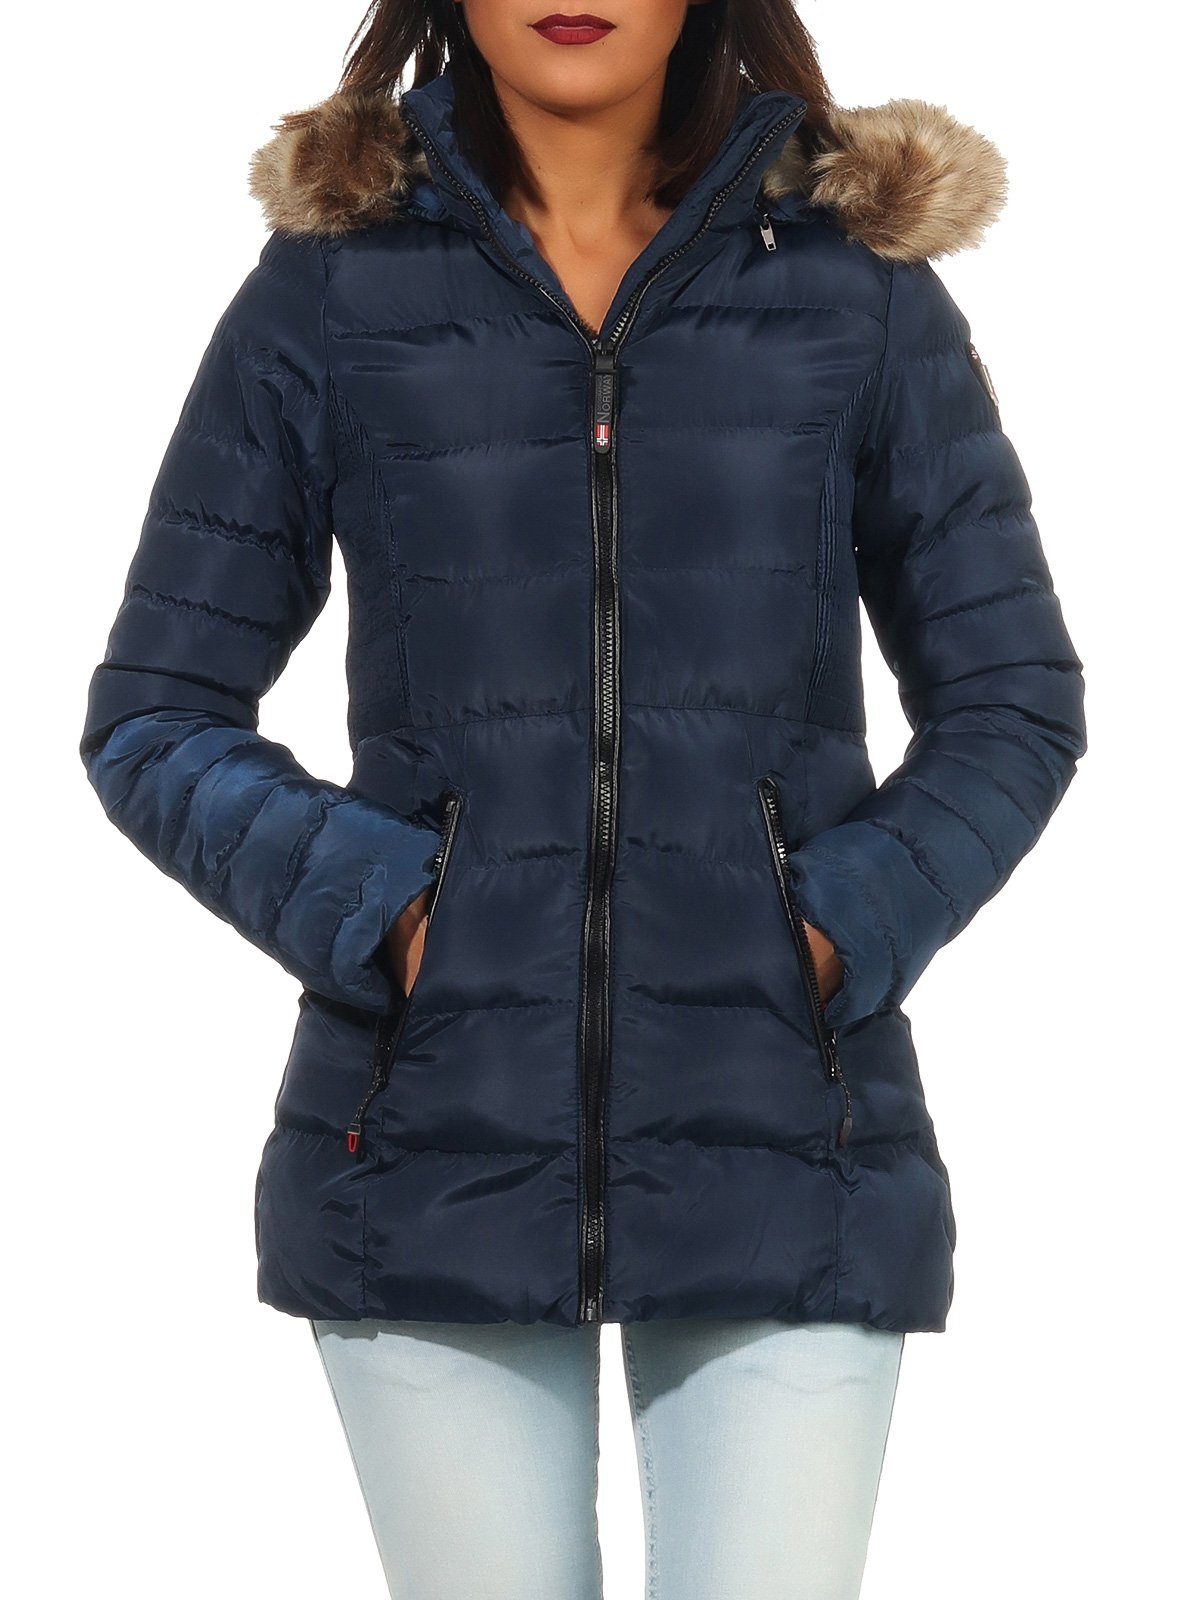 Geographical Norway Winterjacke G-Anella by leyoley mit abnehmbarer Kapuze